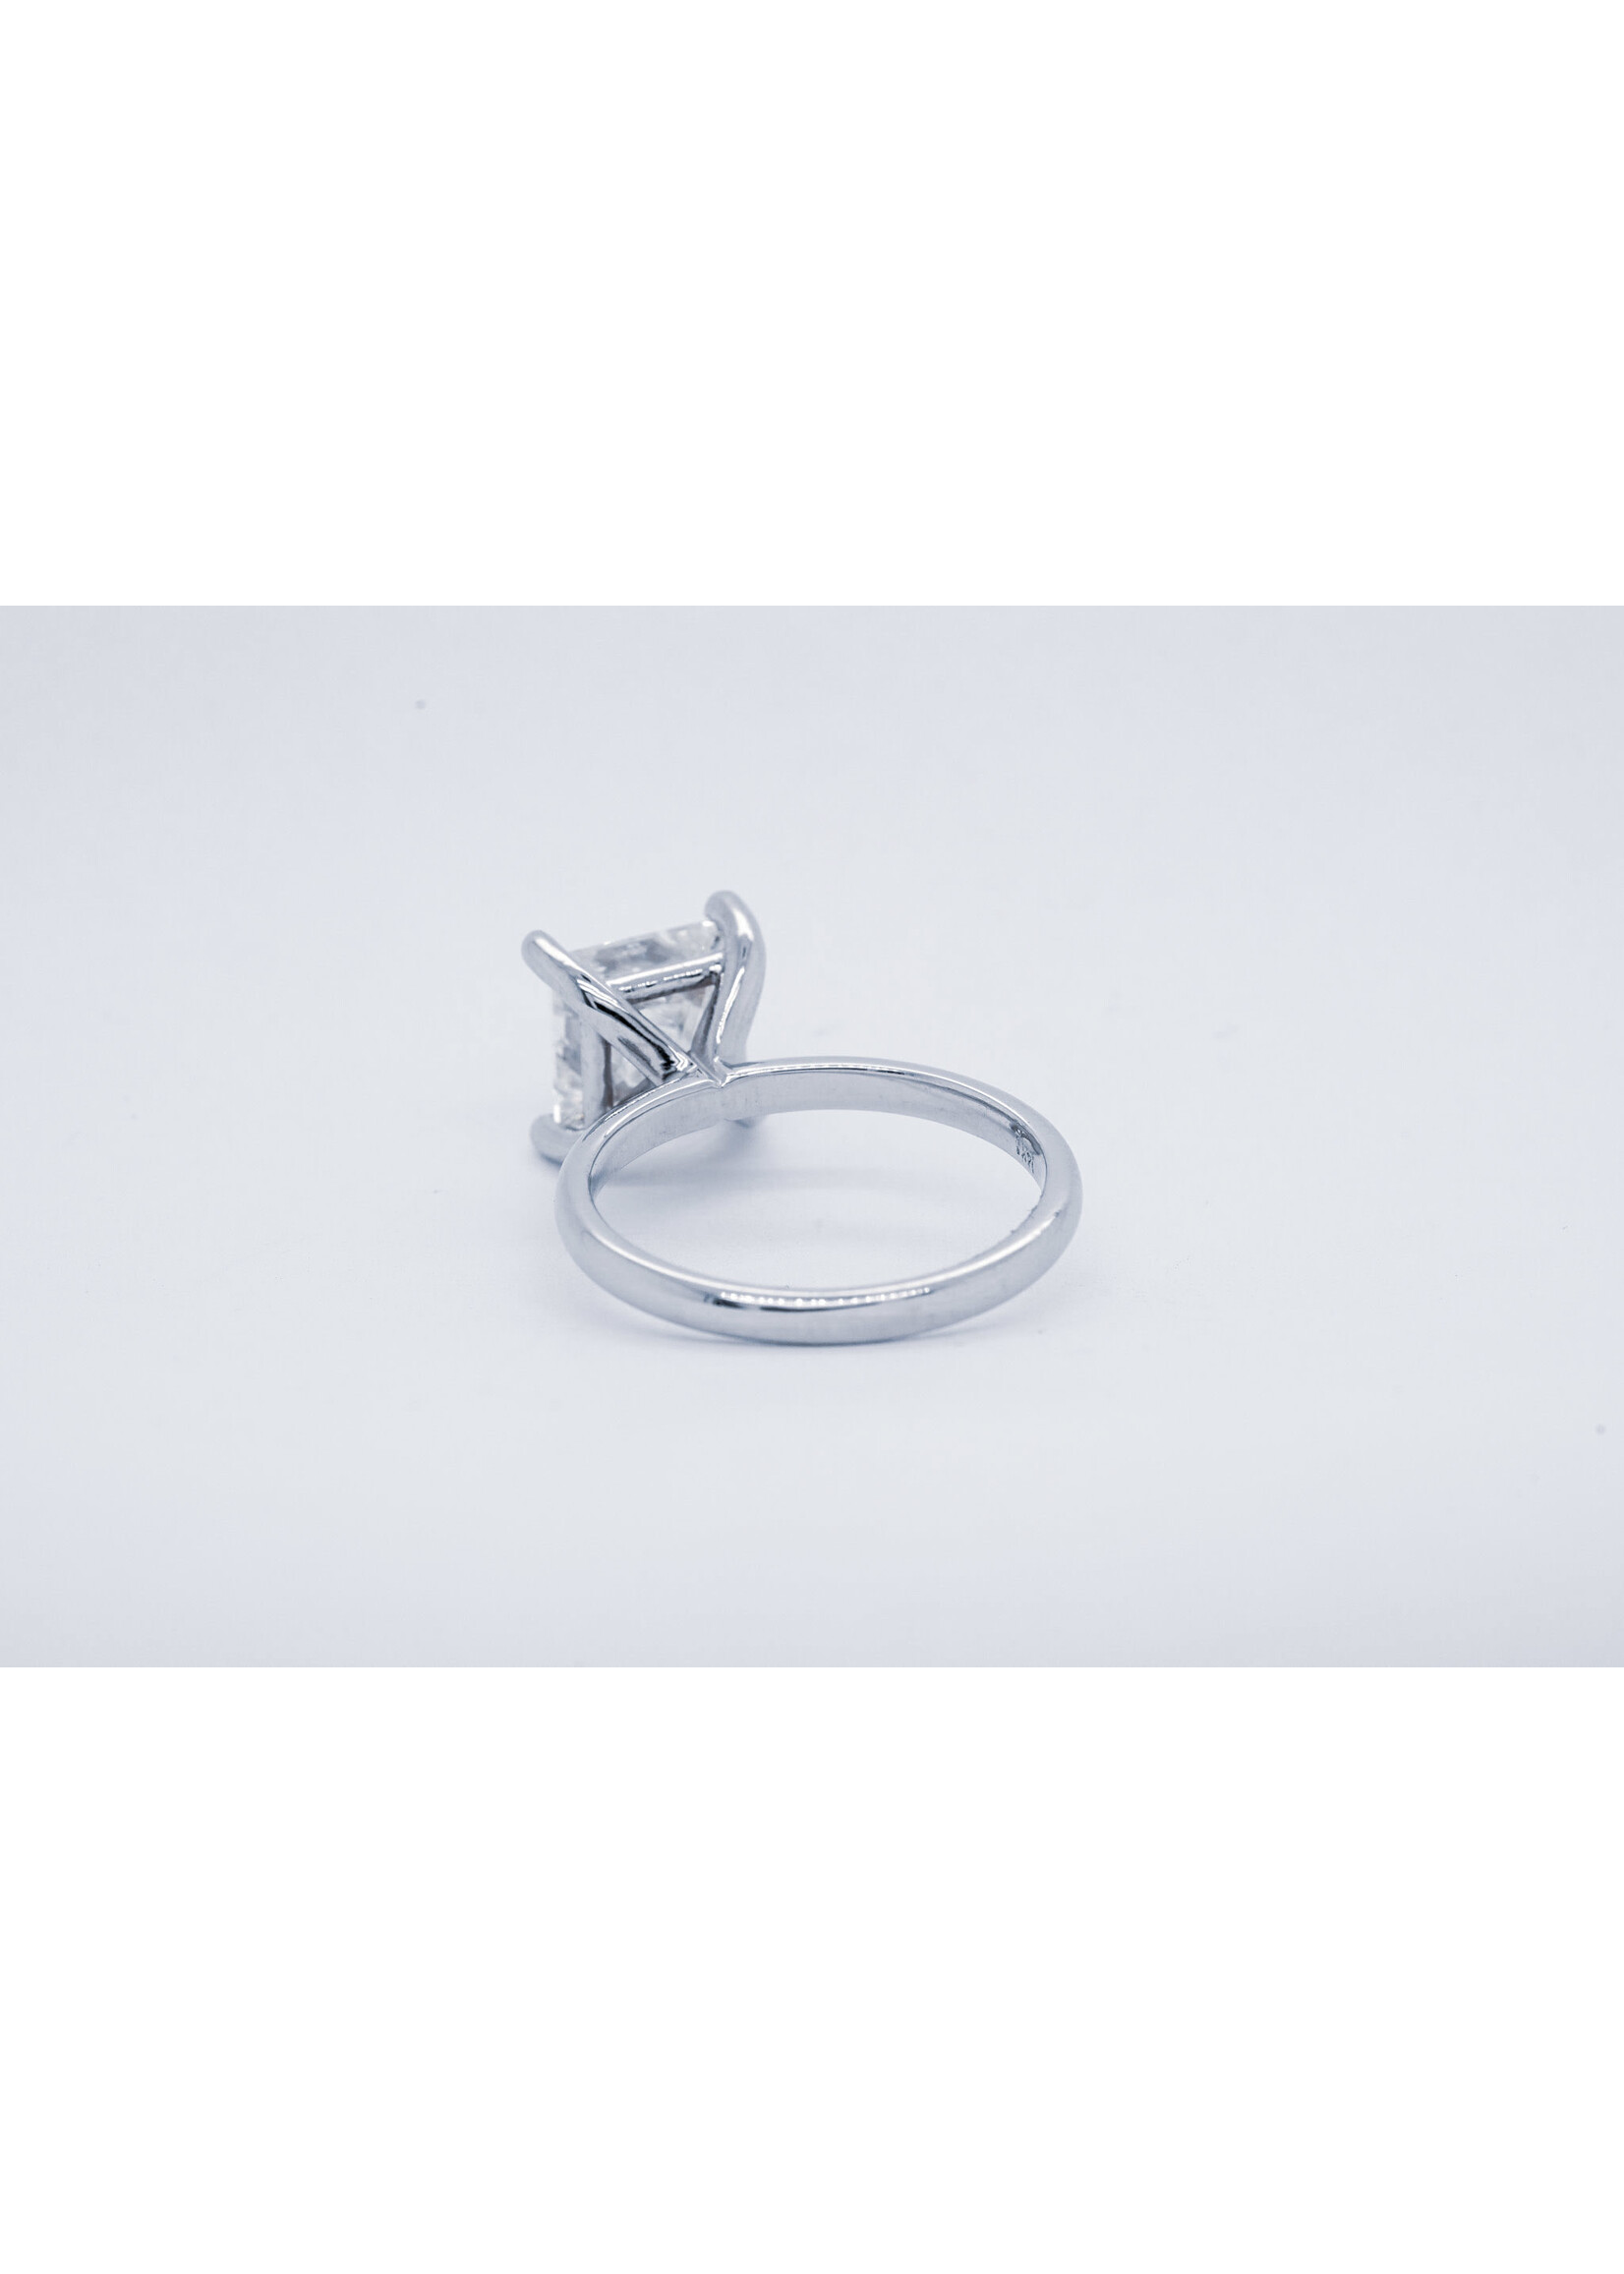 LETT- 14KW 4.05g 3.07ct I/SI2 Princess Cut Diamond Solitaire Engagement Ring (size 7.25)